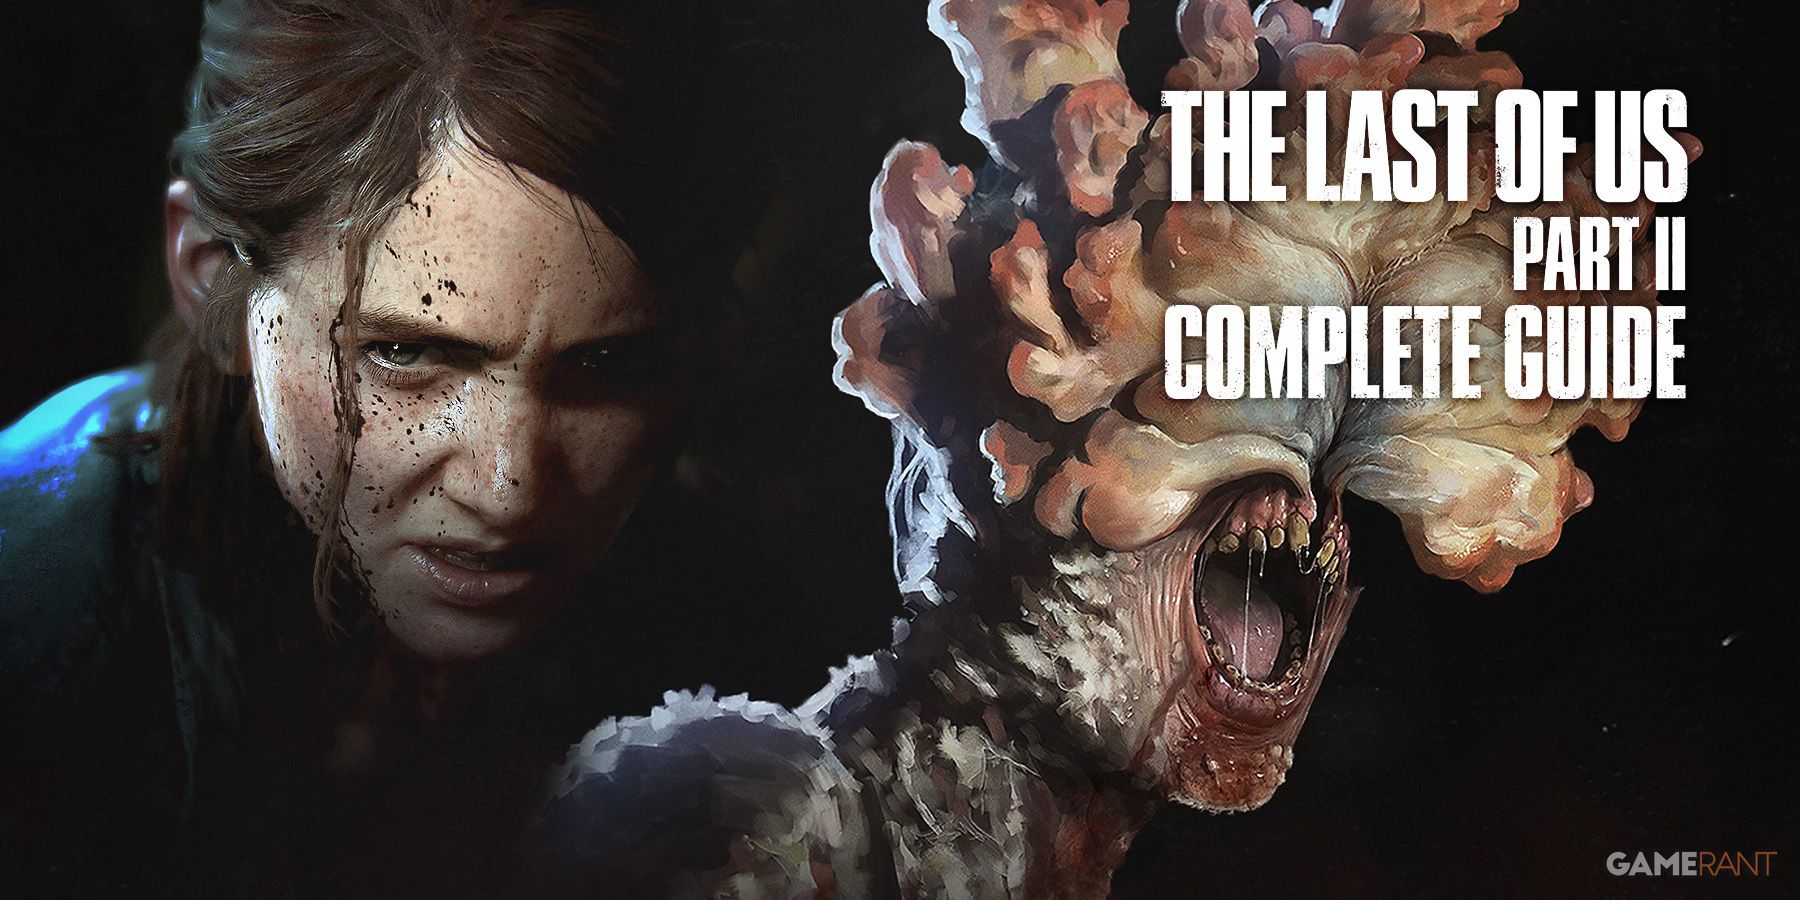 The Last of Us Part II -- Tips and tricks for surviving the